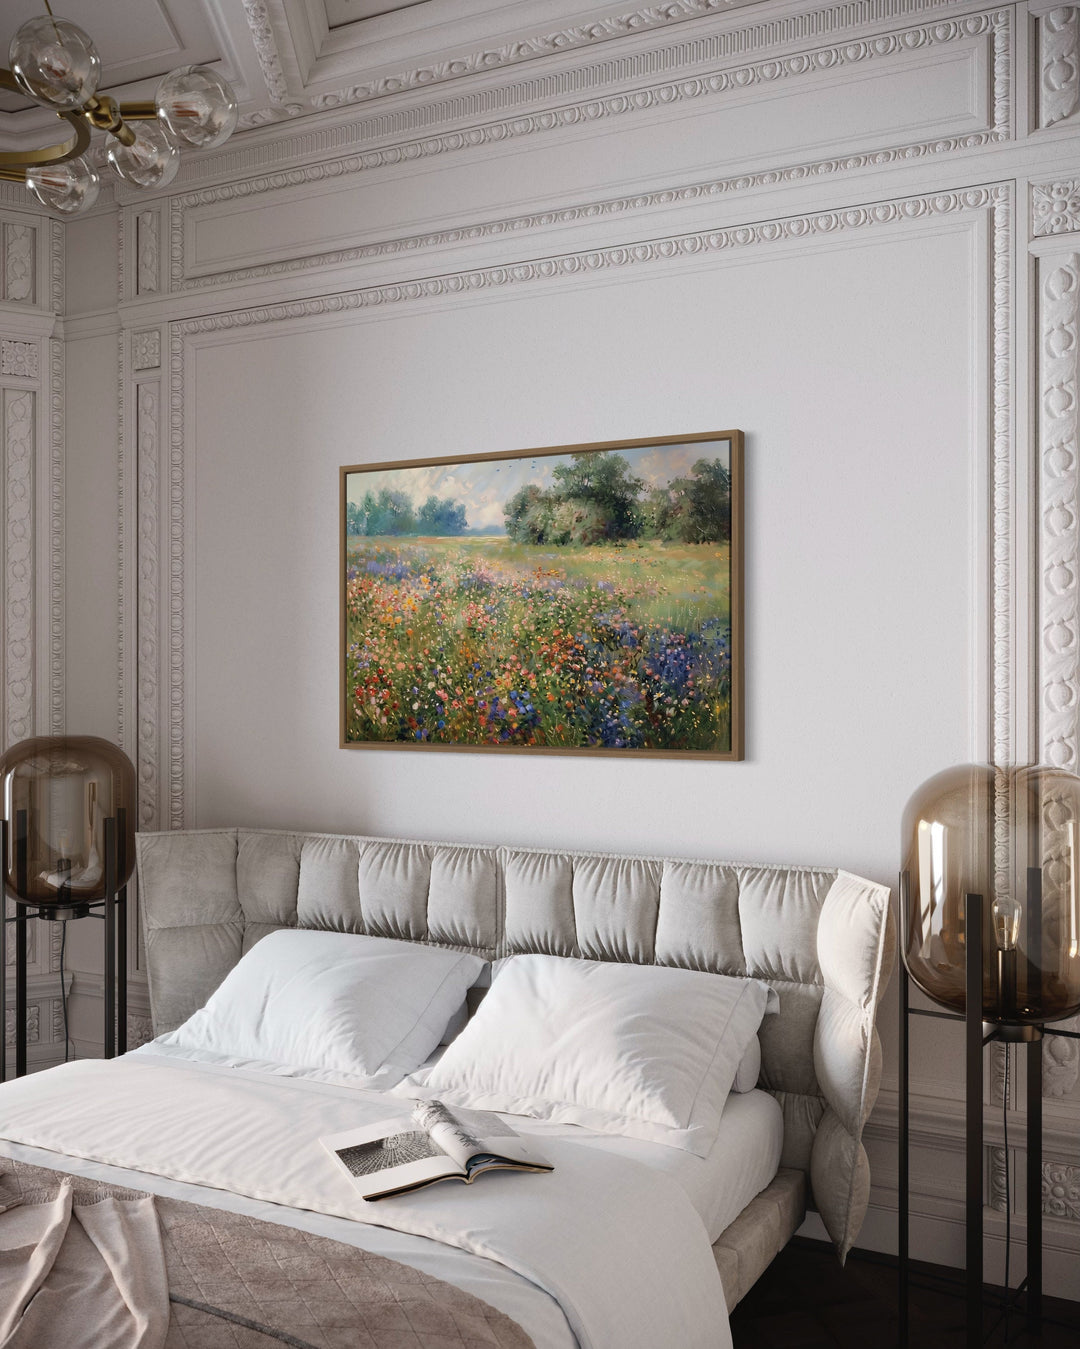 Antique Wildflowers Meadow Farmhouse Framed Canvas Wall Art above bed